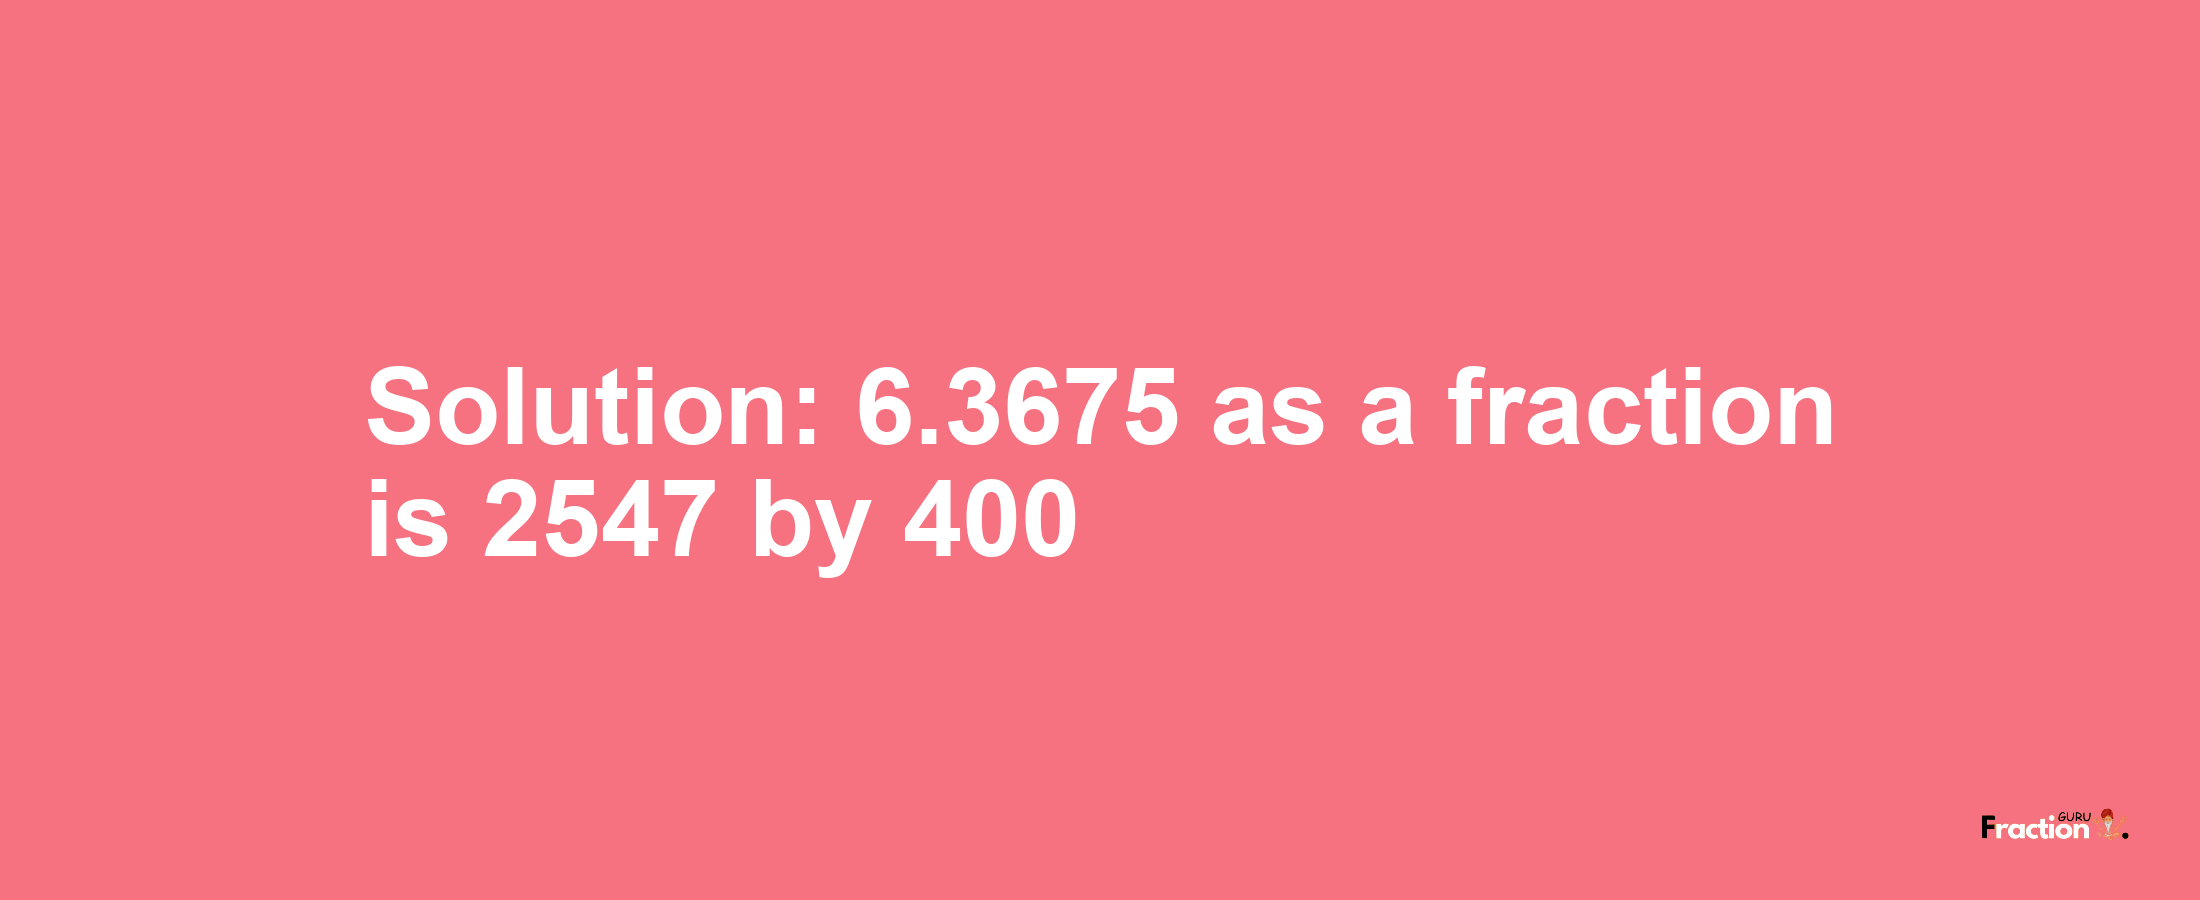 Solution:6.3675 as a fraction is 2547/400